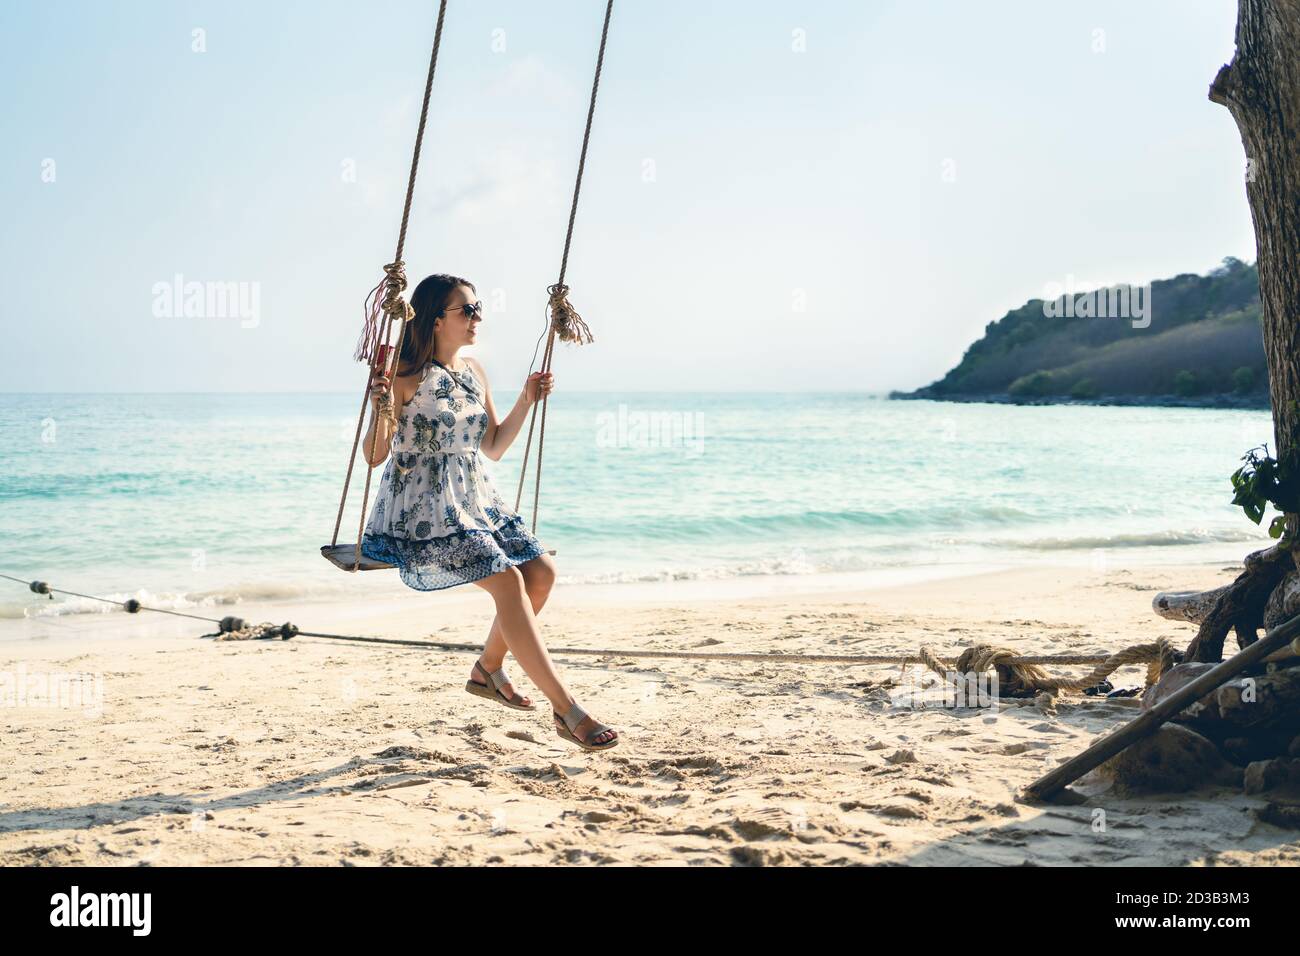 Swing in tropical paradise beach. Woman enjoying life and summer vacation on sunny island in Thailand. Pretty young lady in dress having fun. Stock Photo